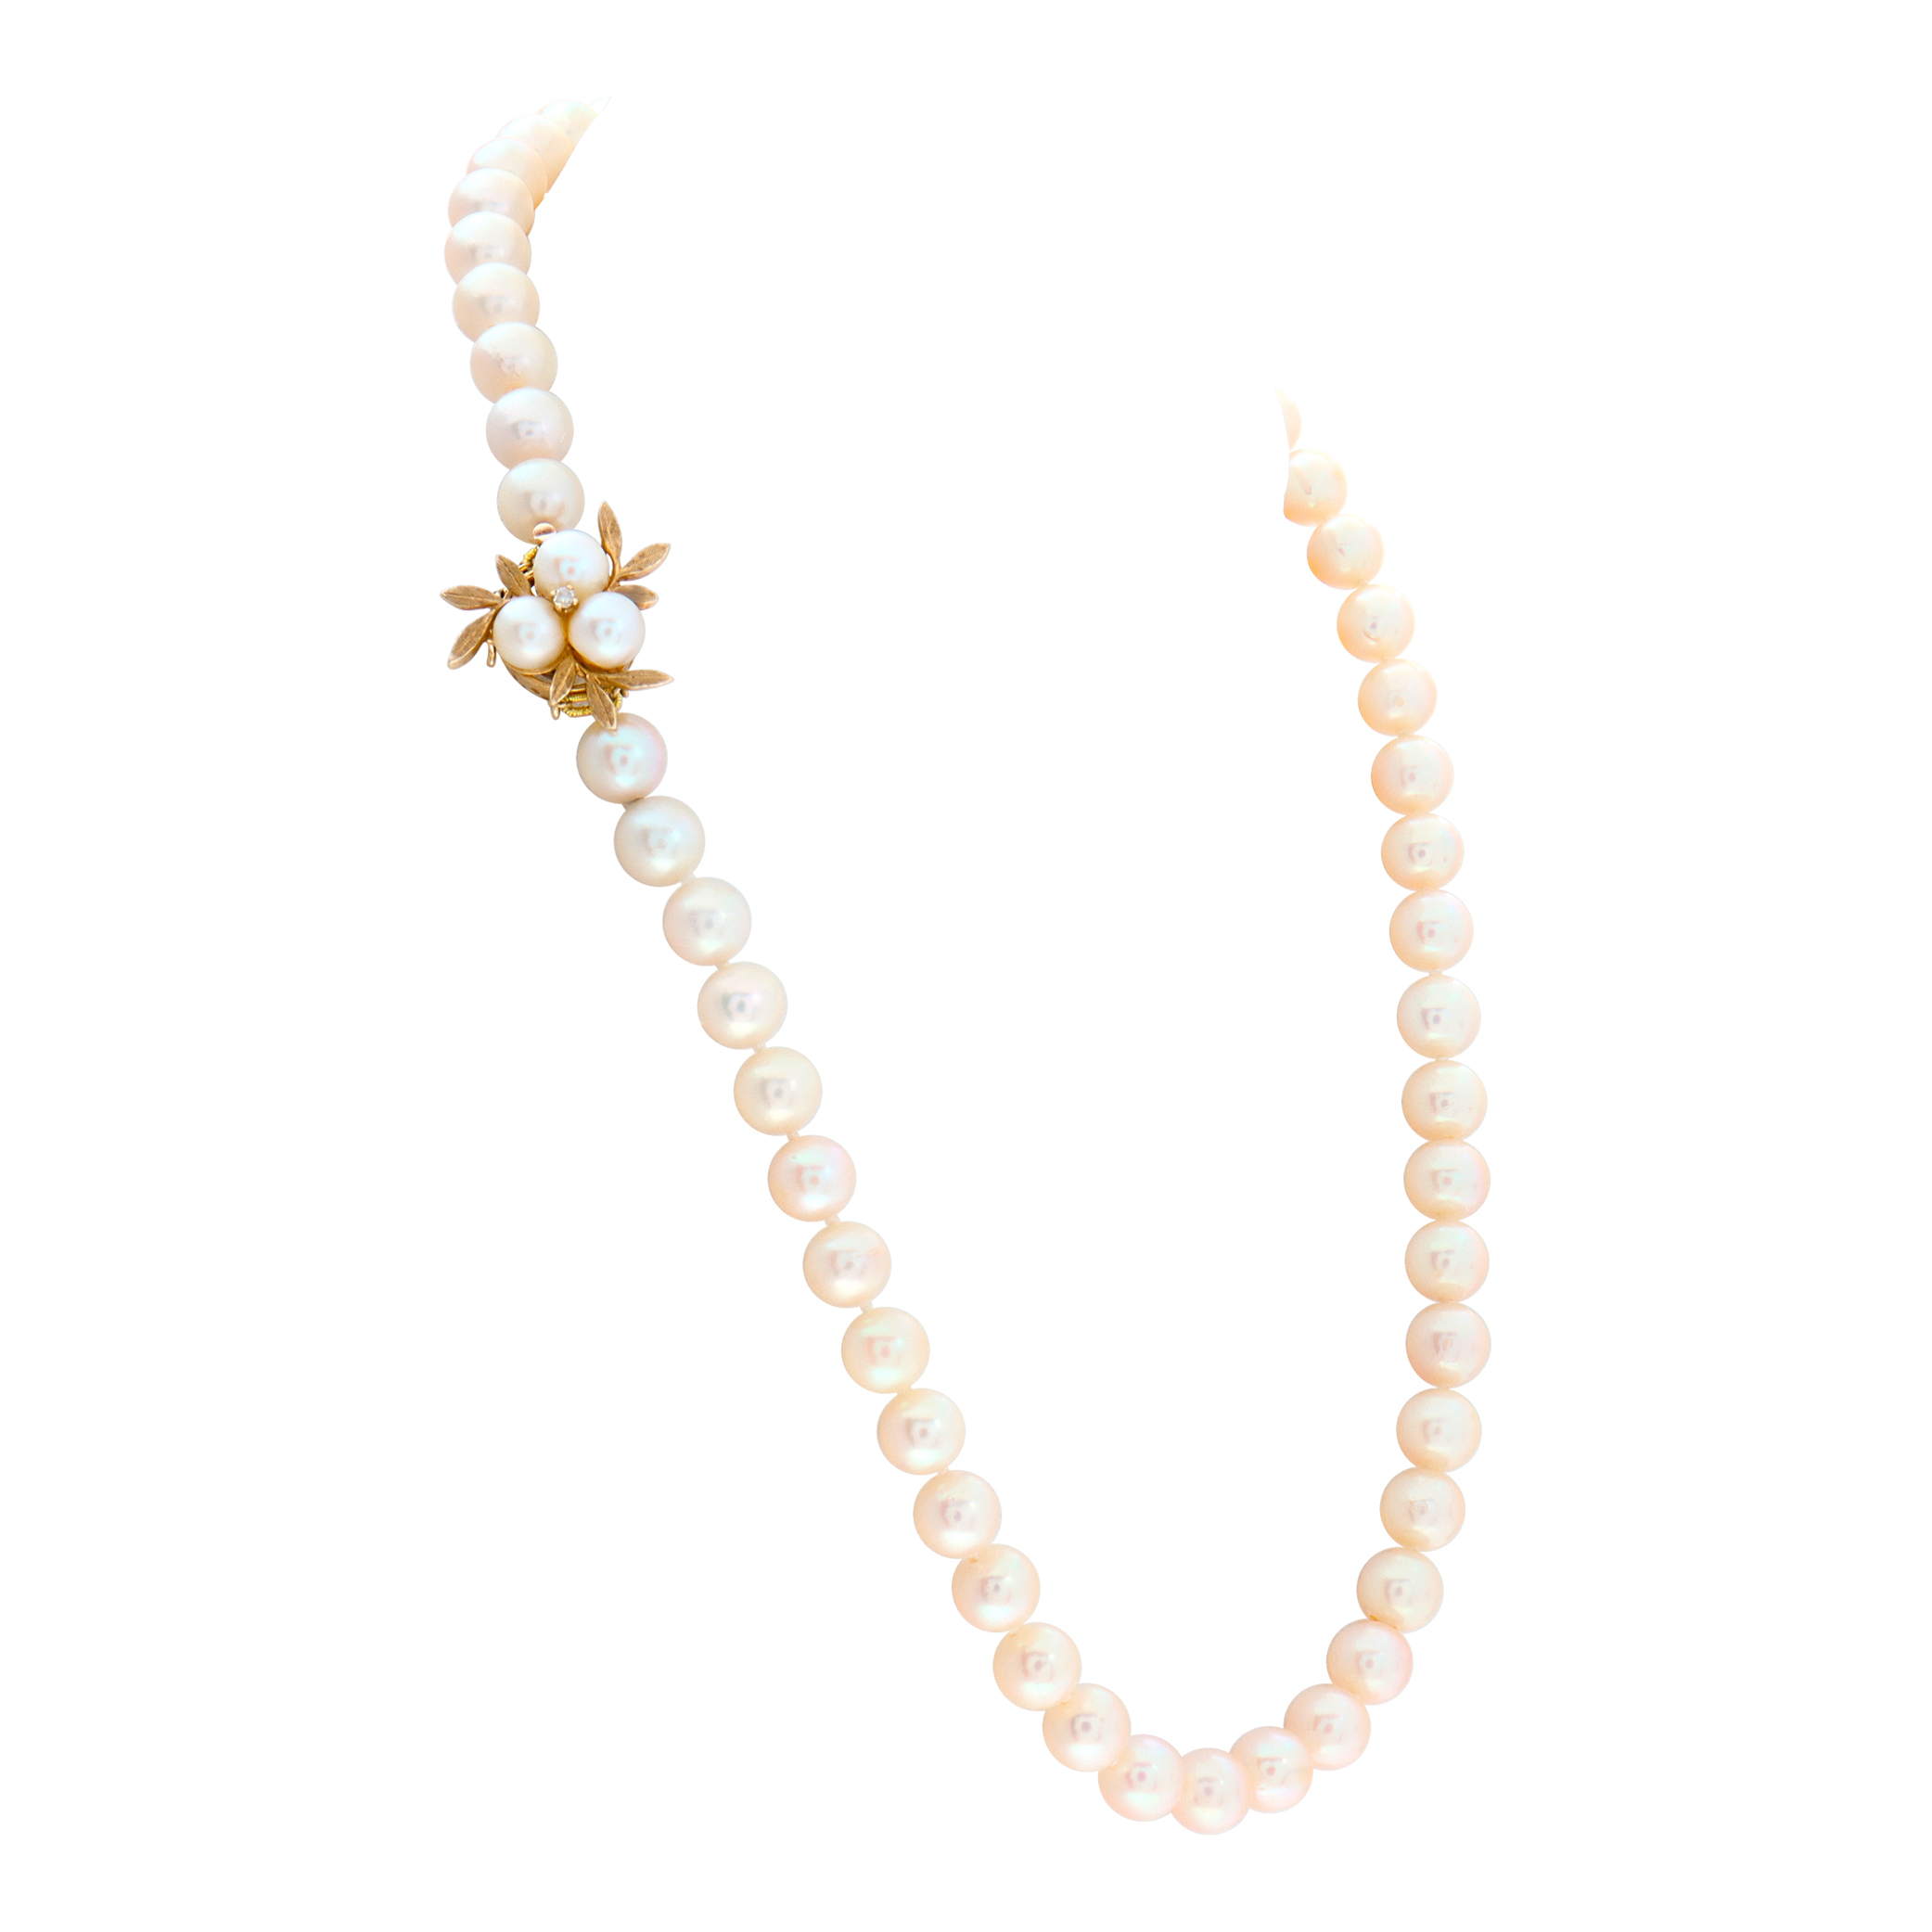 Vintage Akoya pearl (8.5 x 9.00 mm) necklace with 14K yellow gold & Akoya pearls (6mm)  "Flower" clasp Length: 19mm